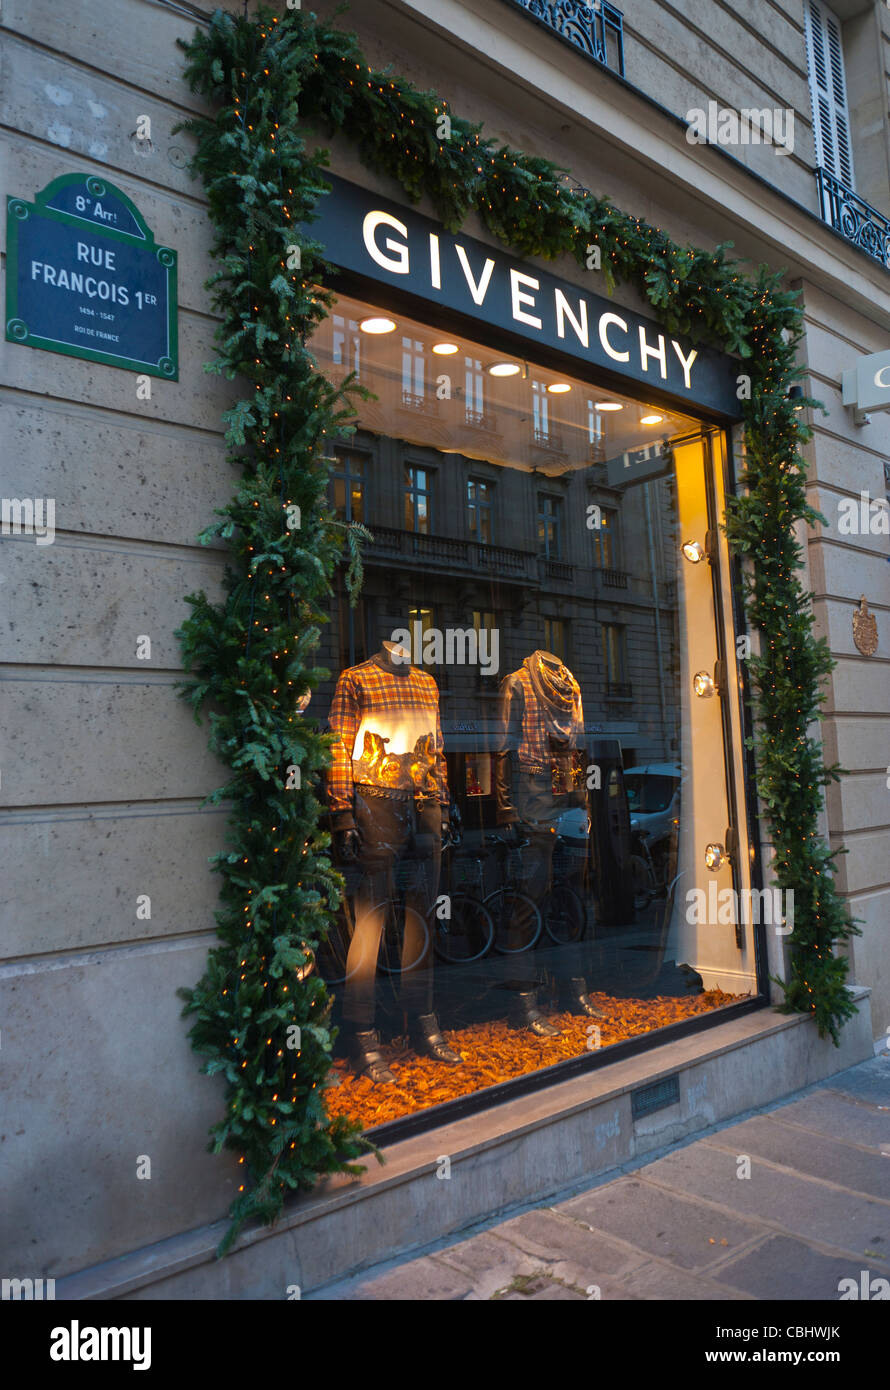 Paris, France, French Luxury Clothing Store Front, Givenchy Boutique, lvmh  montaigne Stock Photo - Alamy